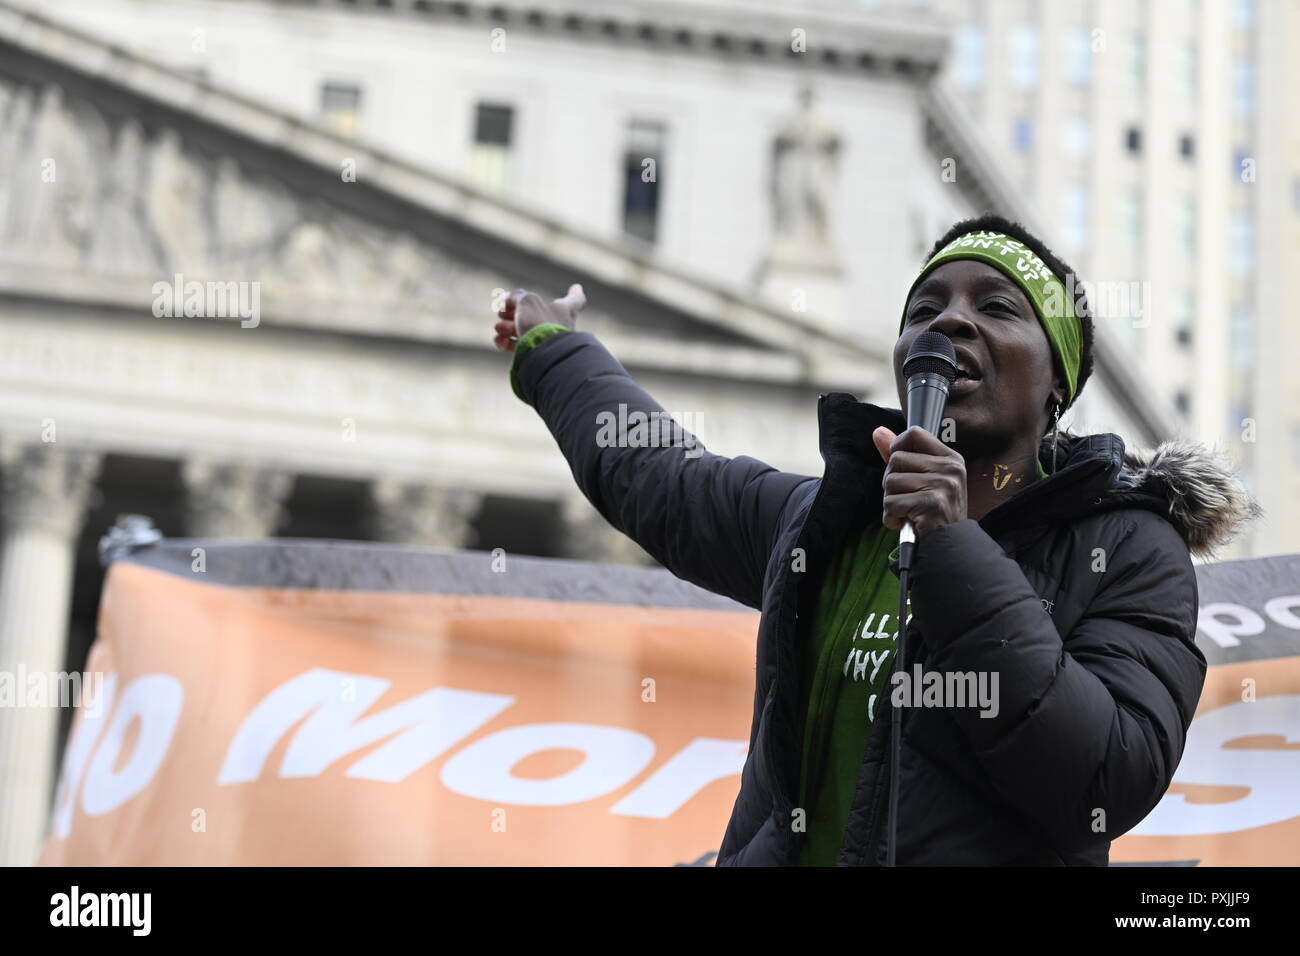 New York, USA, 22nd Oct, 2018.  Patricia Okoumou points toward the Federal courthouse where she is scheduled to be tried on Dec 17.  Okoumo spoke a a rally against police brutality at  Foley Square in lower Manhattan.  It was one of dozens of similar events scheduled in cities across the U.S. to mark the 23rd Annual National Day of Protest to Stop Police Brutality. Okoumou, a Congo native, faces trespassing and other charges after she climbed the pedestal of the Statue of Liberty on July 4, 2018, to protest Trump immigration policies. Credit: Joseph Reid/Alamy Live News Stock Photo